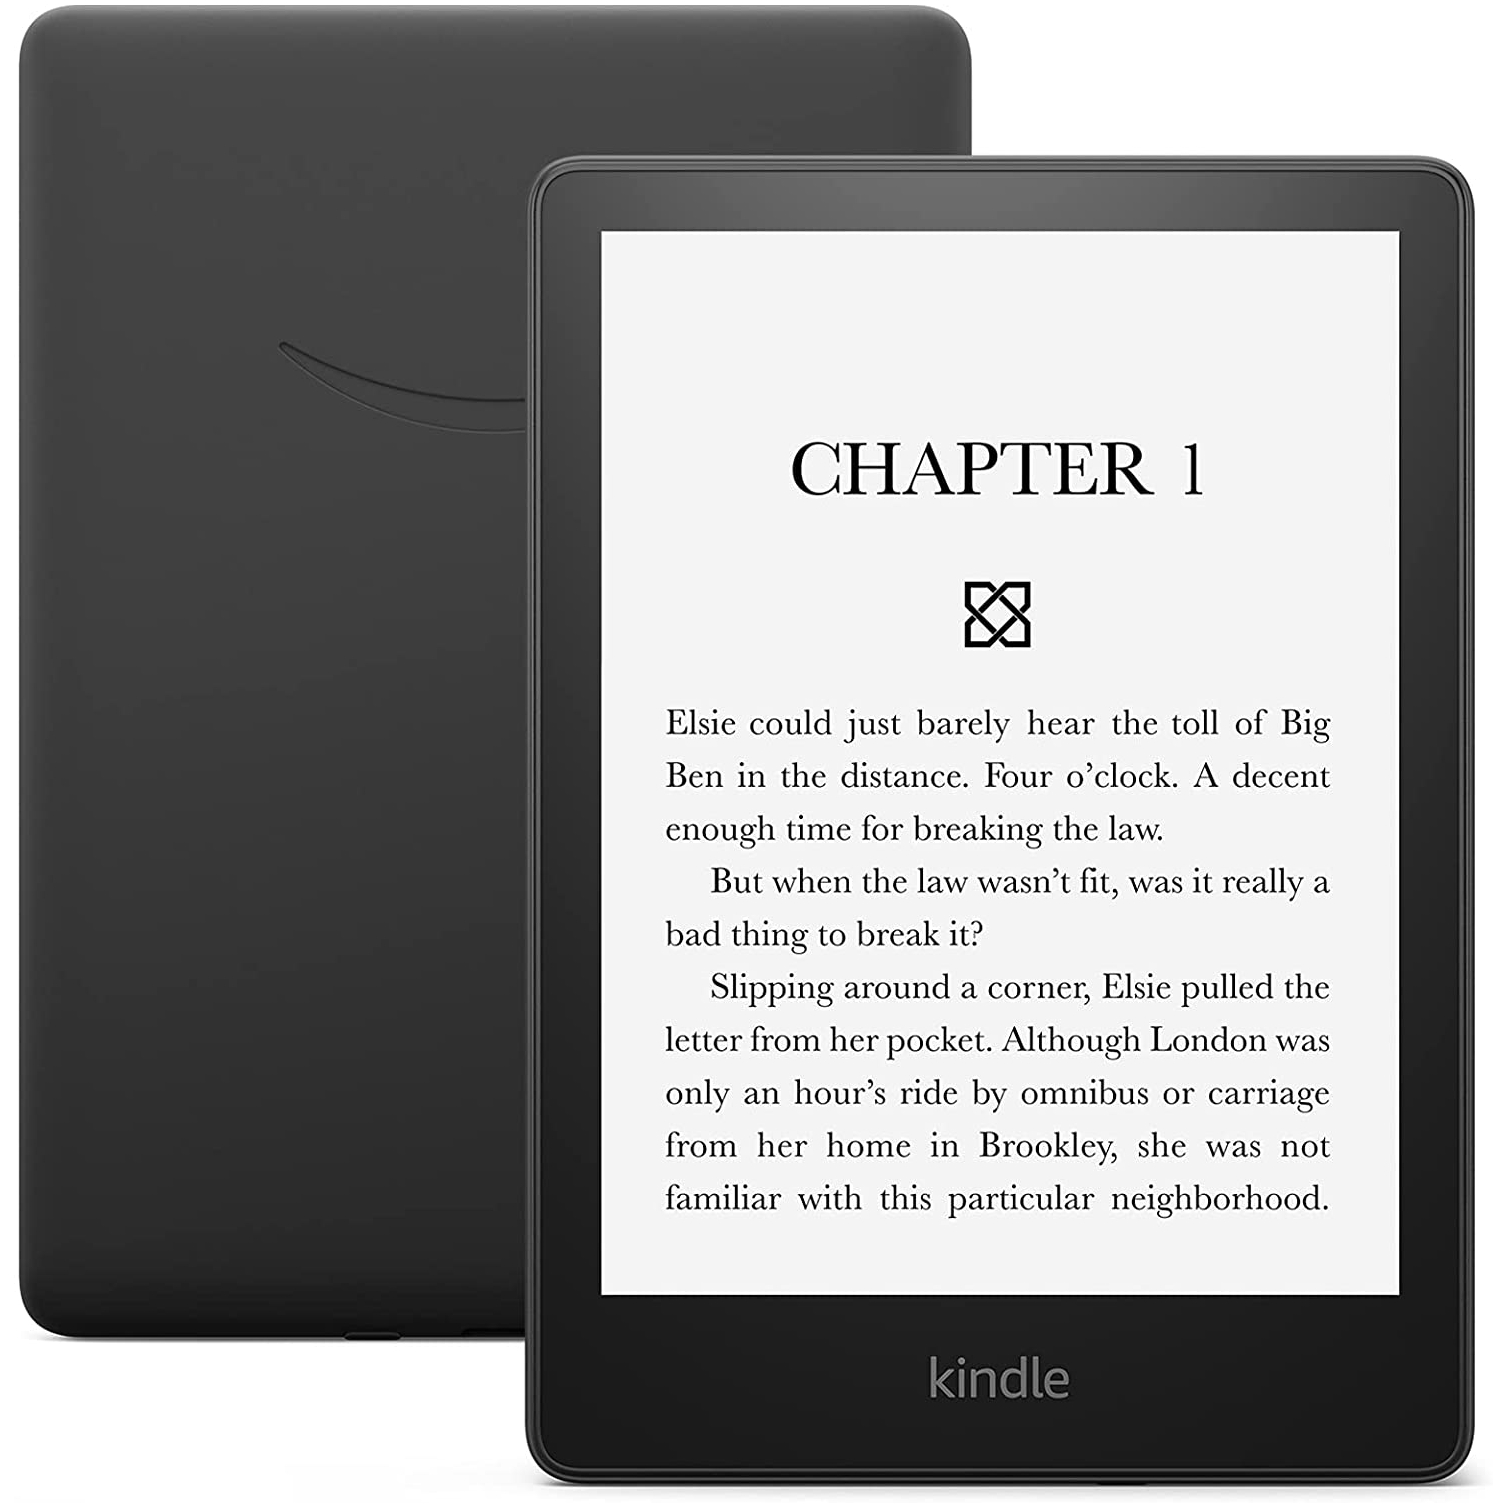 Amazon's new Kindle Paperwhite is already discounted for Black Friday 2021